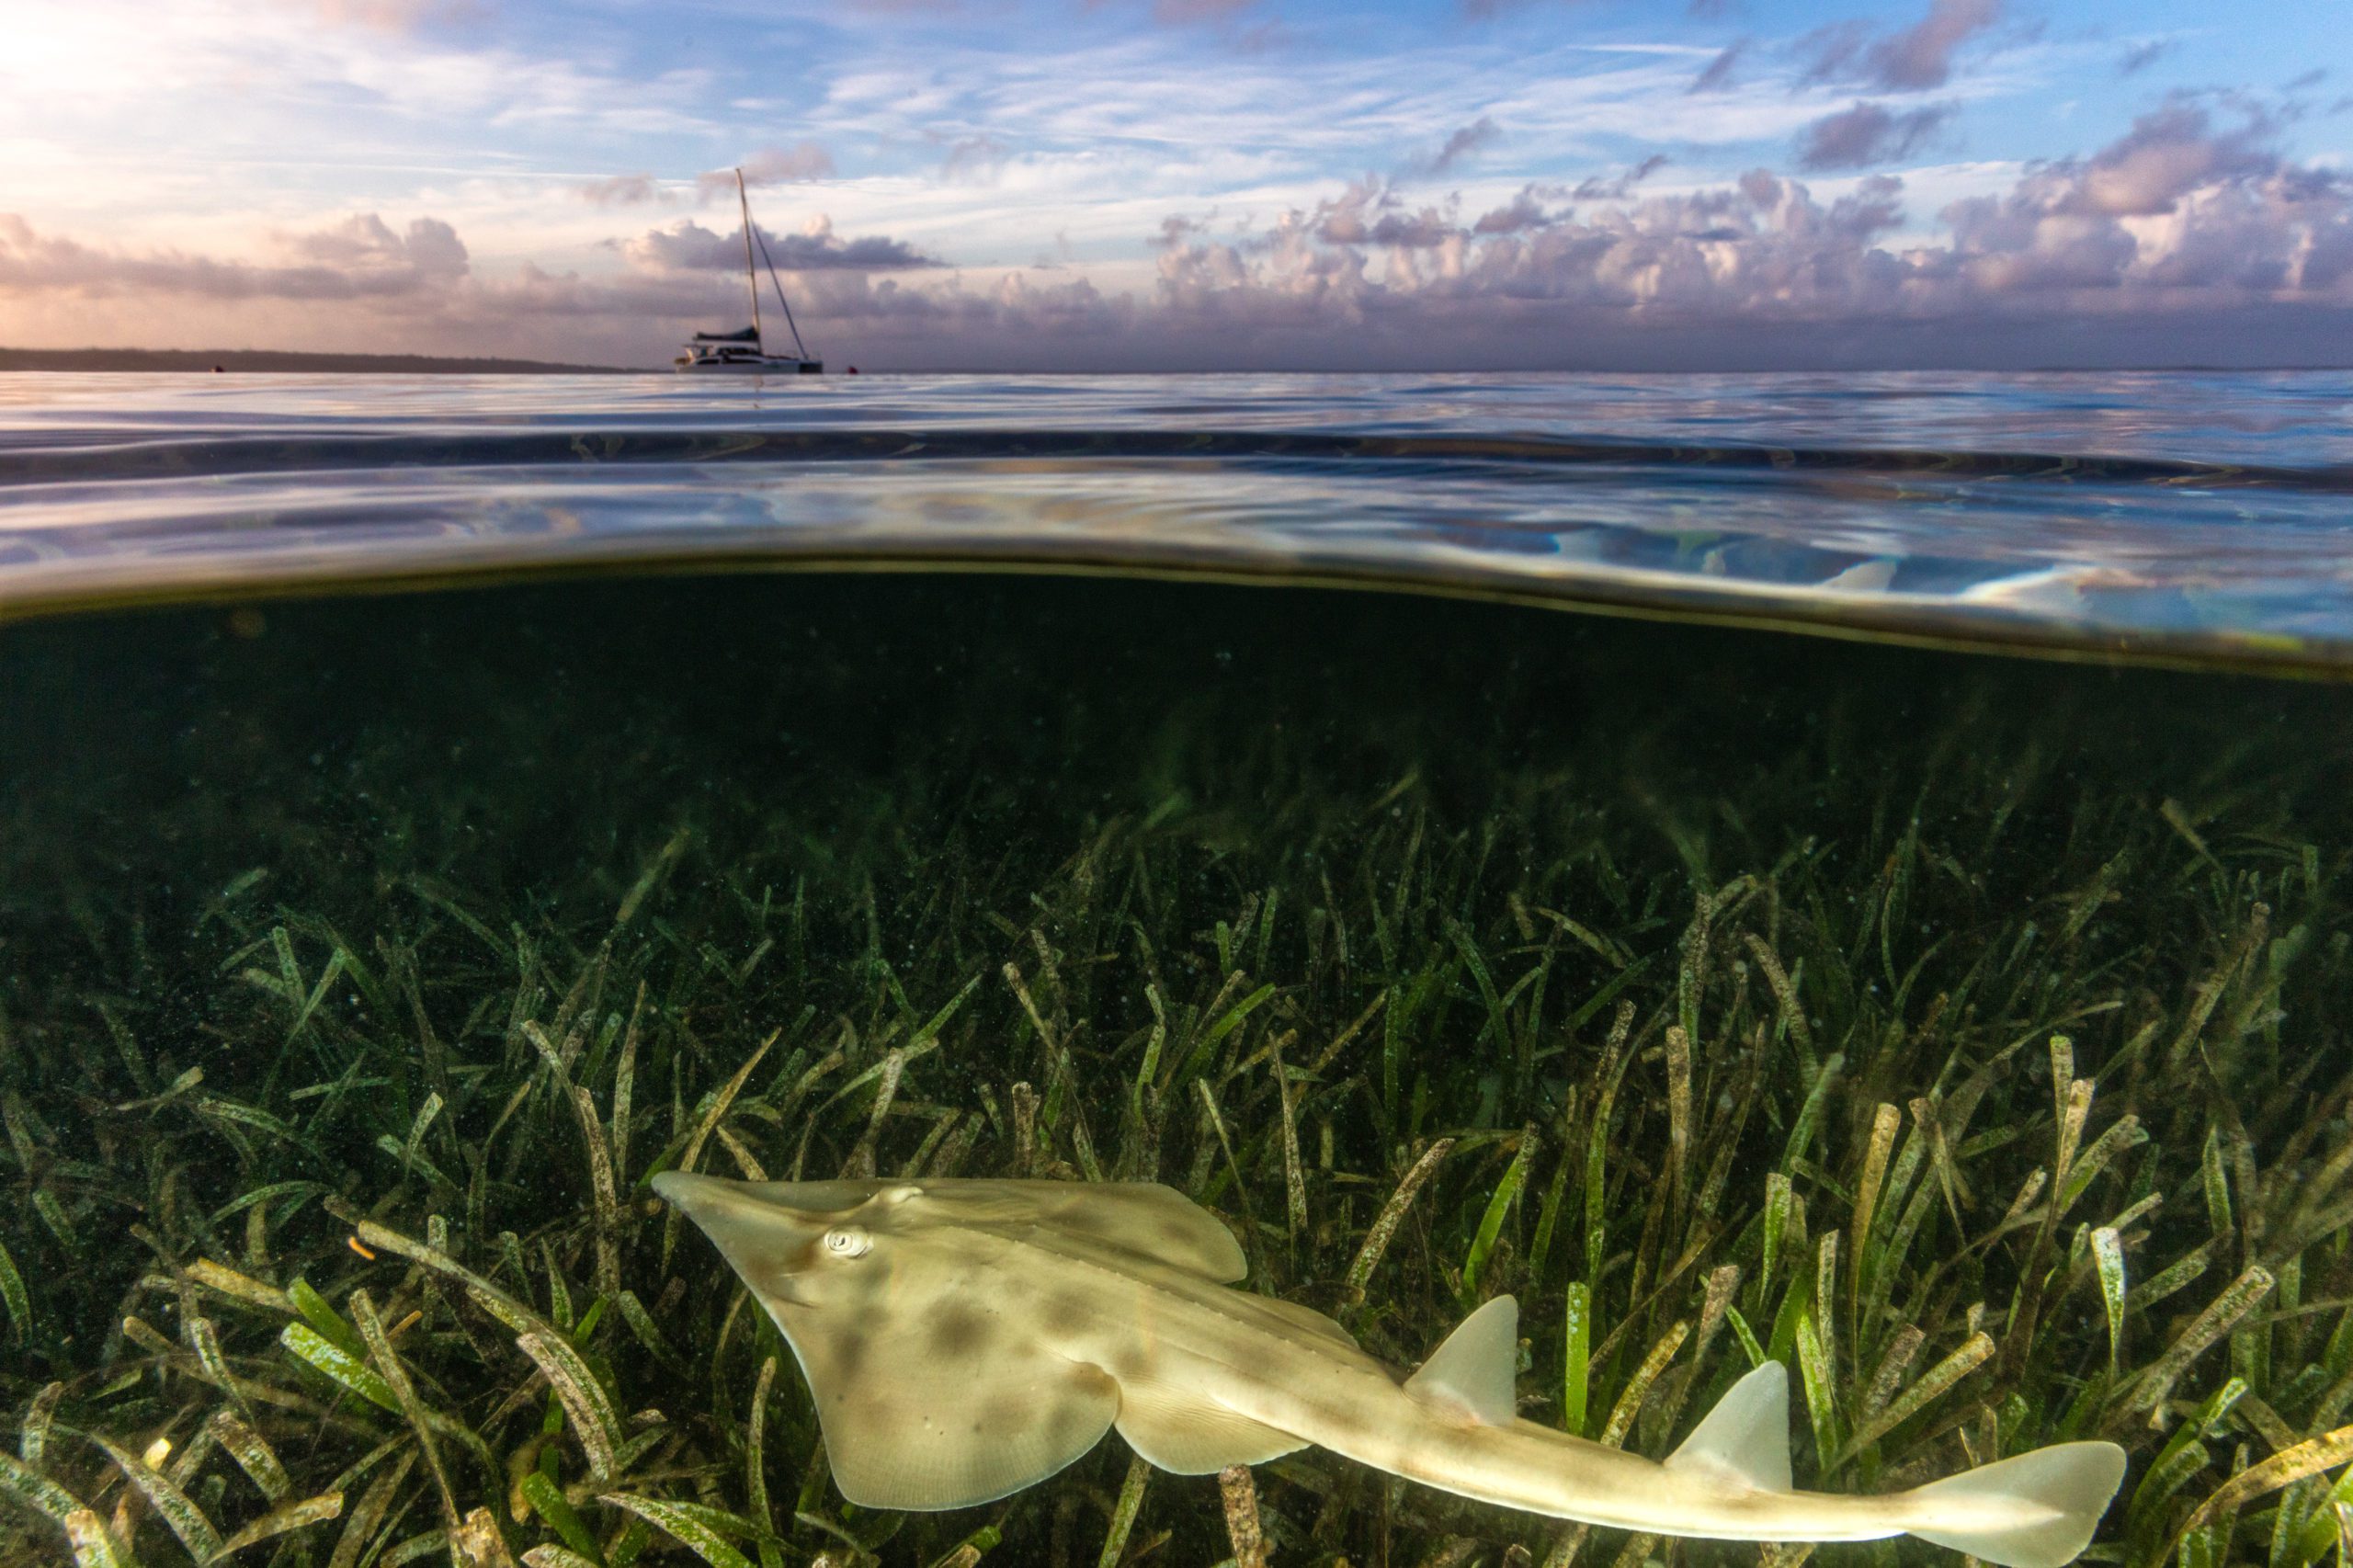 ray in seagrass